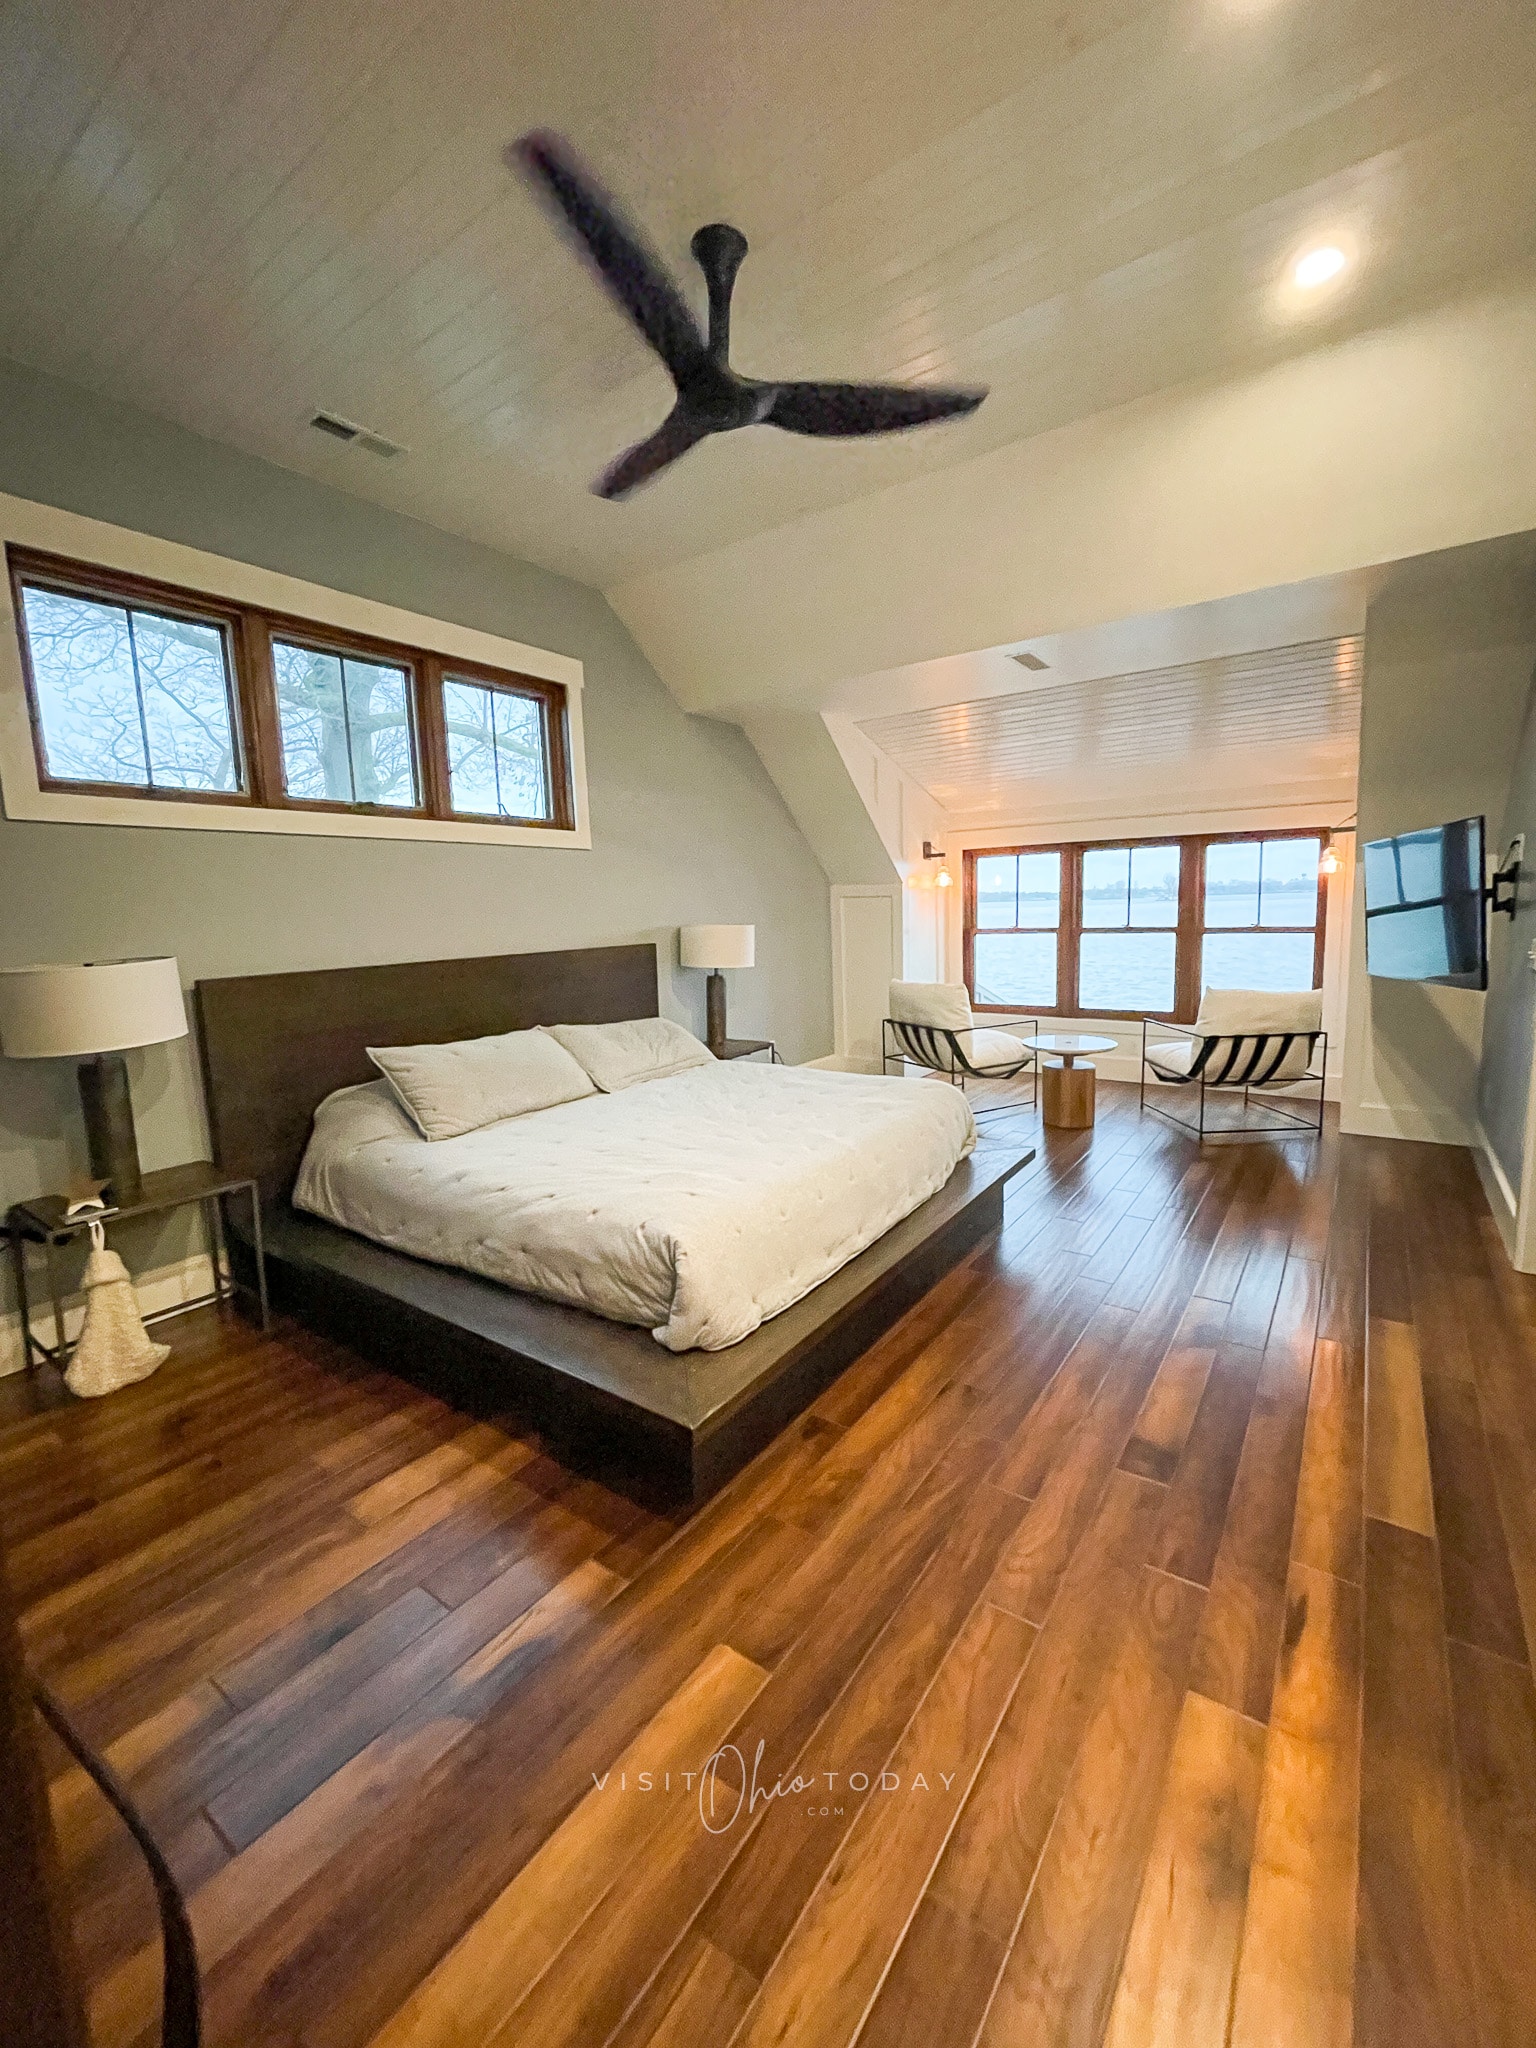 large bedroom with white ceiling and brown moving fan. large brown bed platform with white bed. Wood floors, two chairs in front of window with table inbetween. tv on right wall to side by chairs